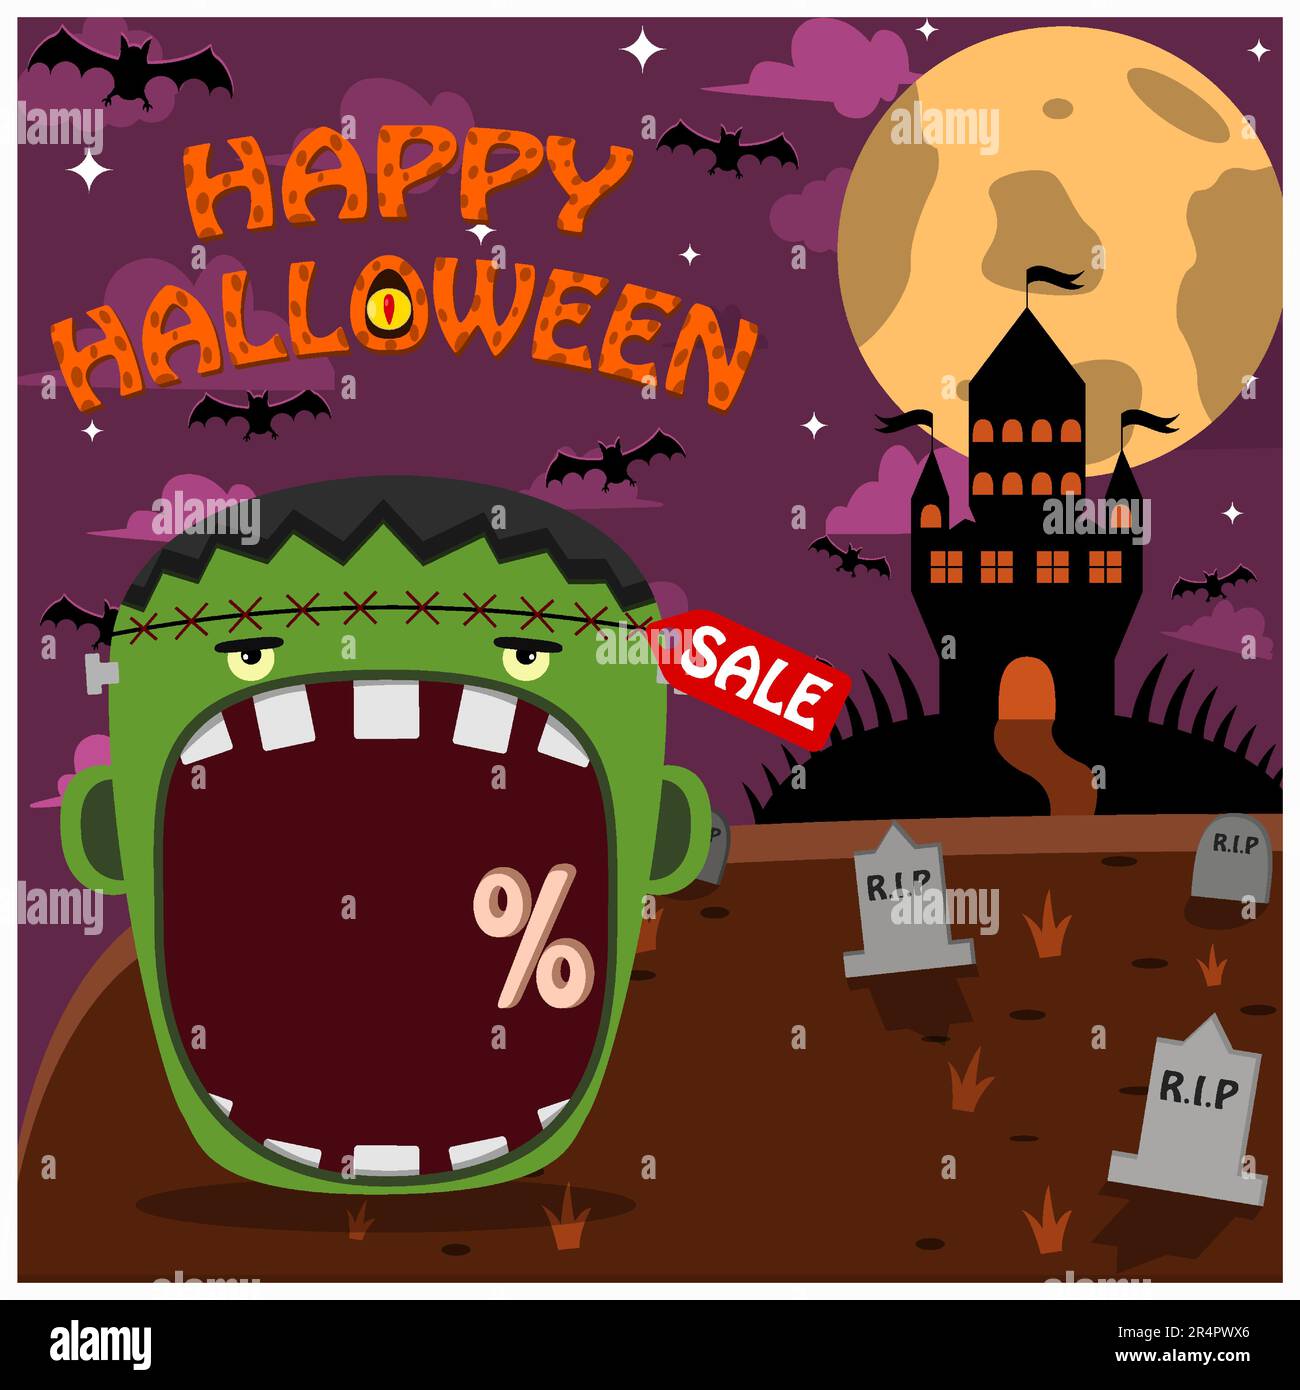 Halloween Character Head With Frankenstein Head On Graveyard and Palace. Percent, Sale, and Dark Background. Vector and Illustration Stock Vector